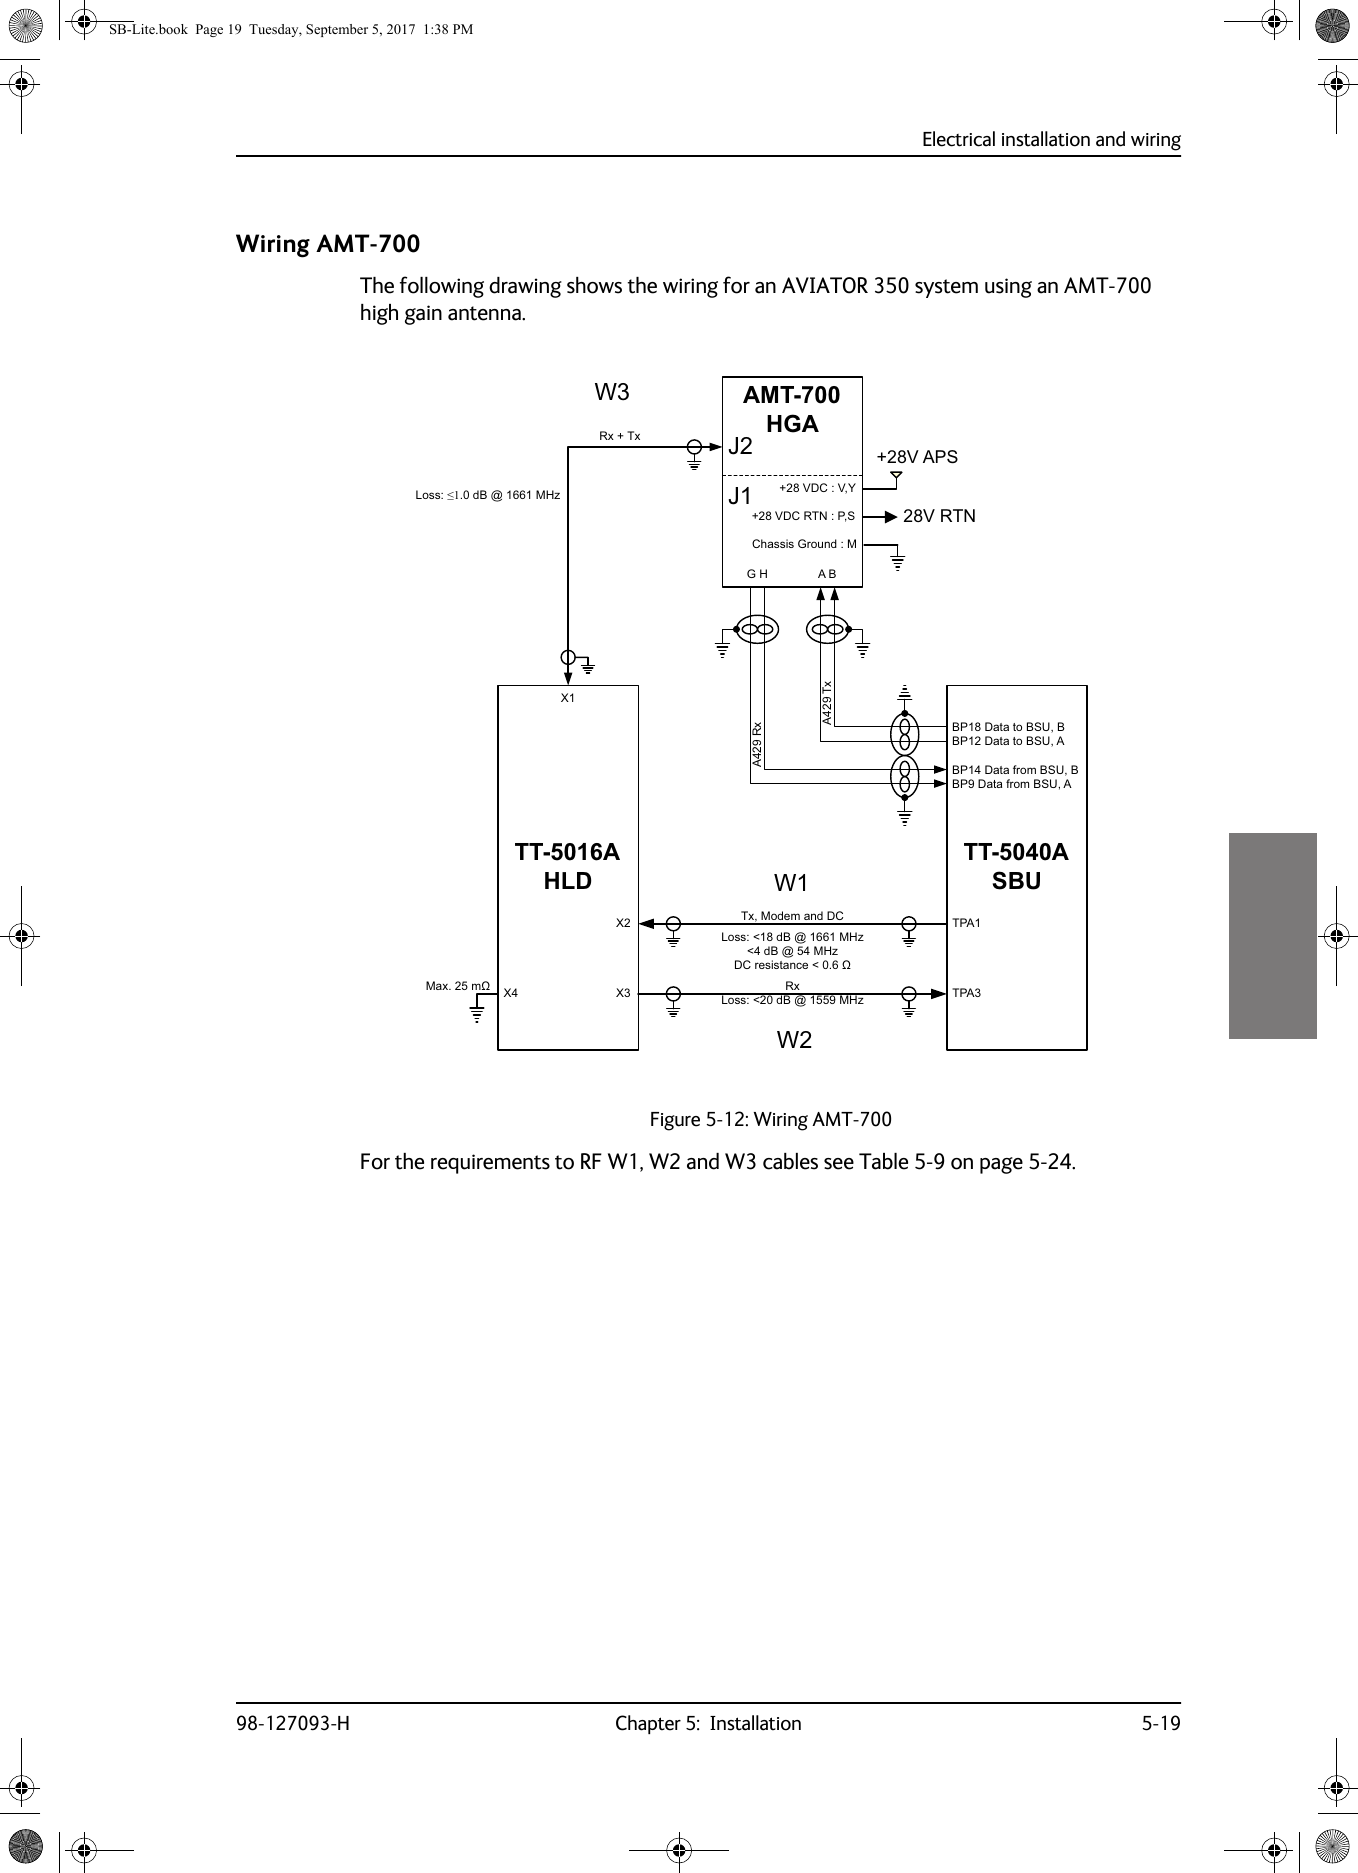 Electrical installation and wiring98-127093-H Chapter 5:  Installation 5-195555Wiring AMT-700The following drawing shows the wiring for an AVIATOR 350 system using an AMT-700 high gain antenna.For the requirements to RF W1, W2 and W3 cables see Table  5-9 on page  5-24.Figure 5-12: Wiring AMT-70077$+/&apos;$07+*$$%;77$6%8*+$7[$5[73$73$;;7[0RGHPDQG&apos;&amp;5[5[7[;0D[Pȍ/RVVG%#0+]/RVVG%#0+]/RVVG%#0+]G%#0+]&apos;&amp;UHVLVWDQFHȍ9$3695719&apos;&amp;9&lt;9&apos;&amp;57136&amp;KDVVLV*URXQG0--:::%3&apos;DWDWR%68%%3&apos;DWDWR%68$%3&apos;DWDIURP%68%%3&apos;DWDIURP%68$SB-Lite.book  Page 19  Tuesday, September 5, 2017  1:38 PM